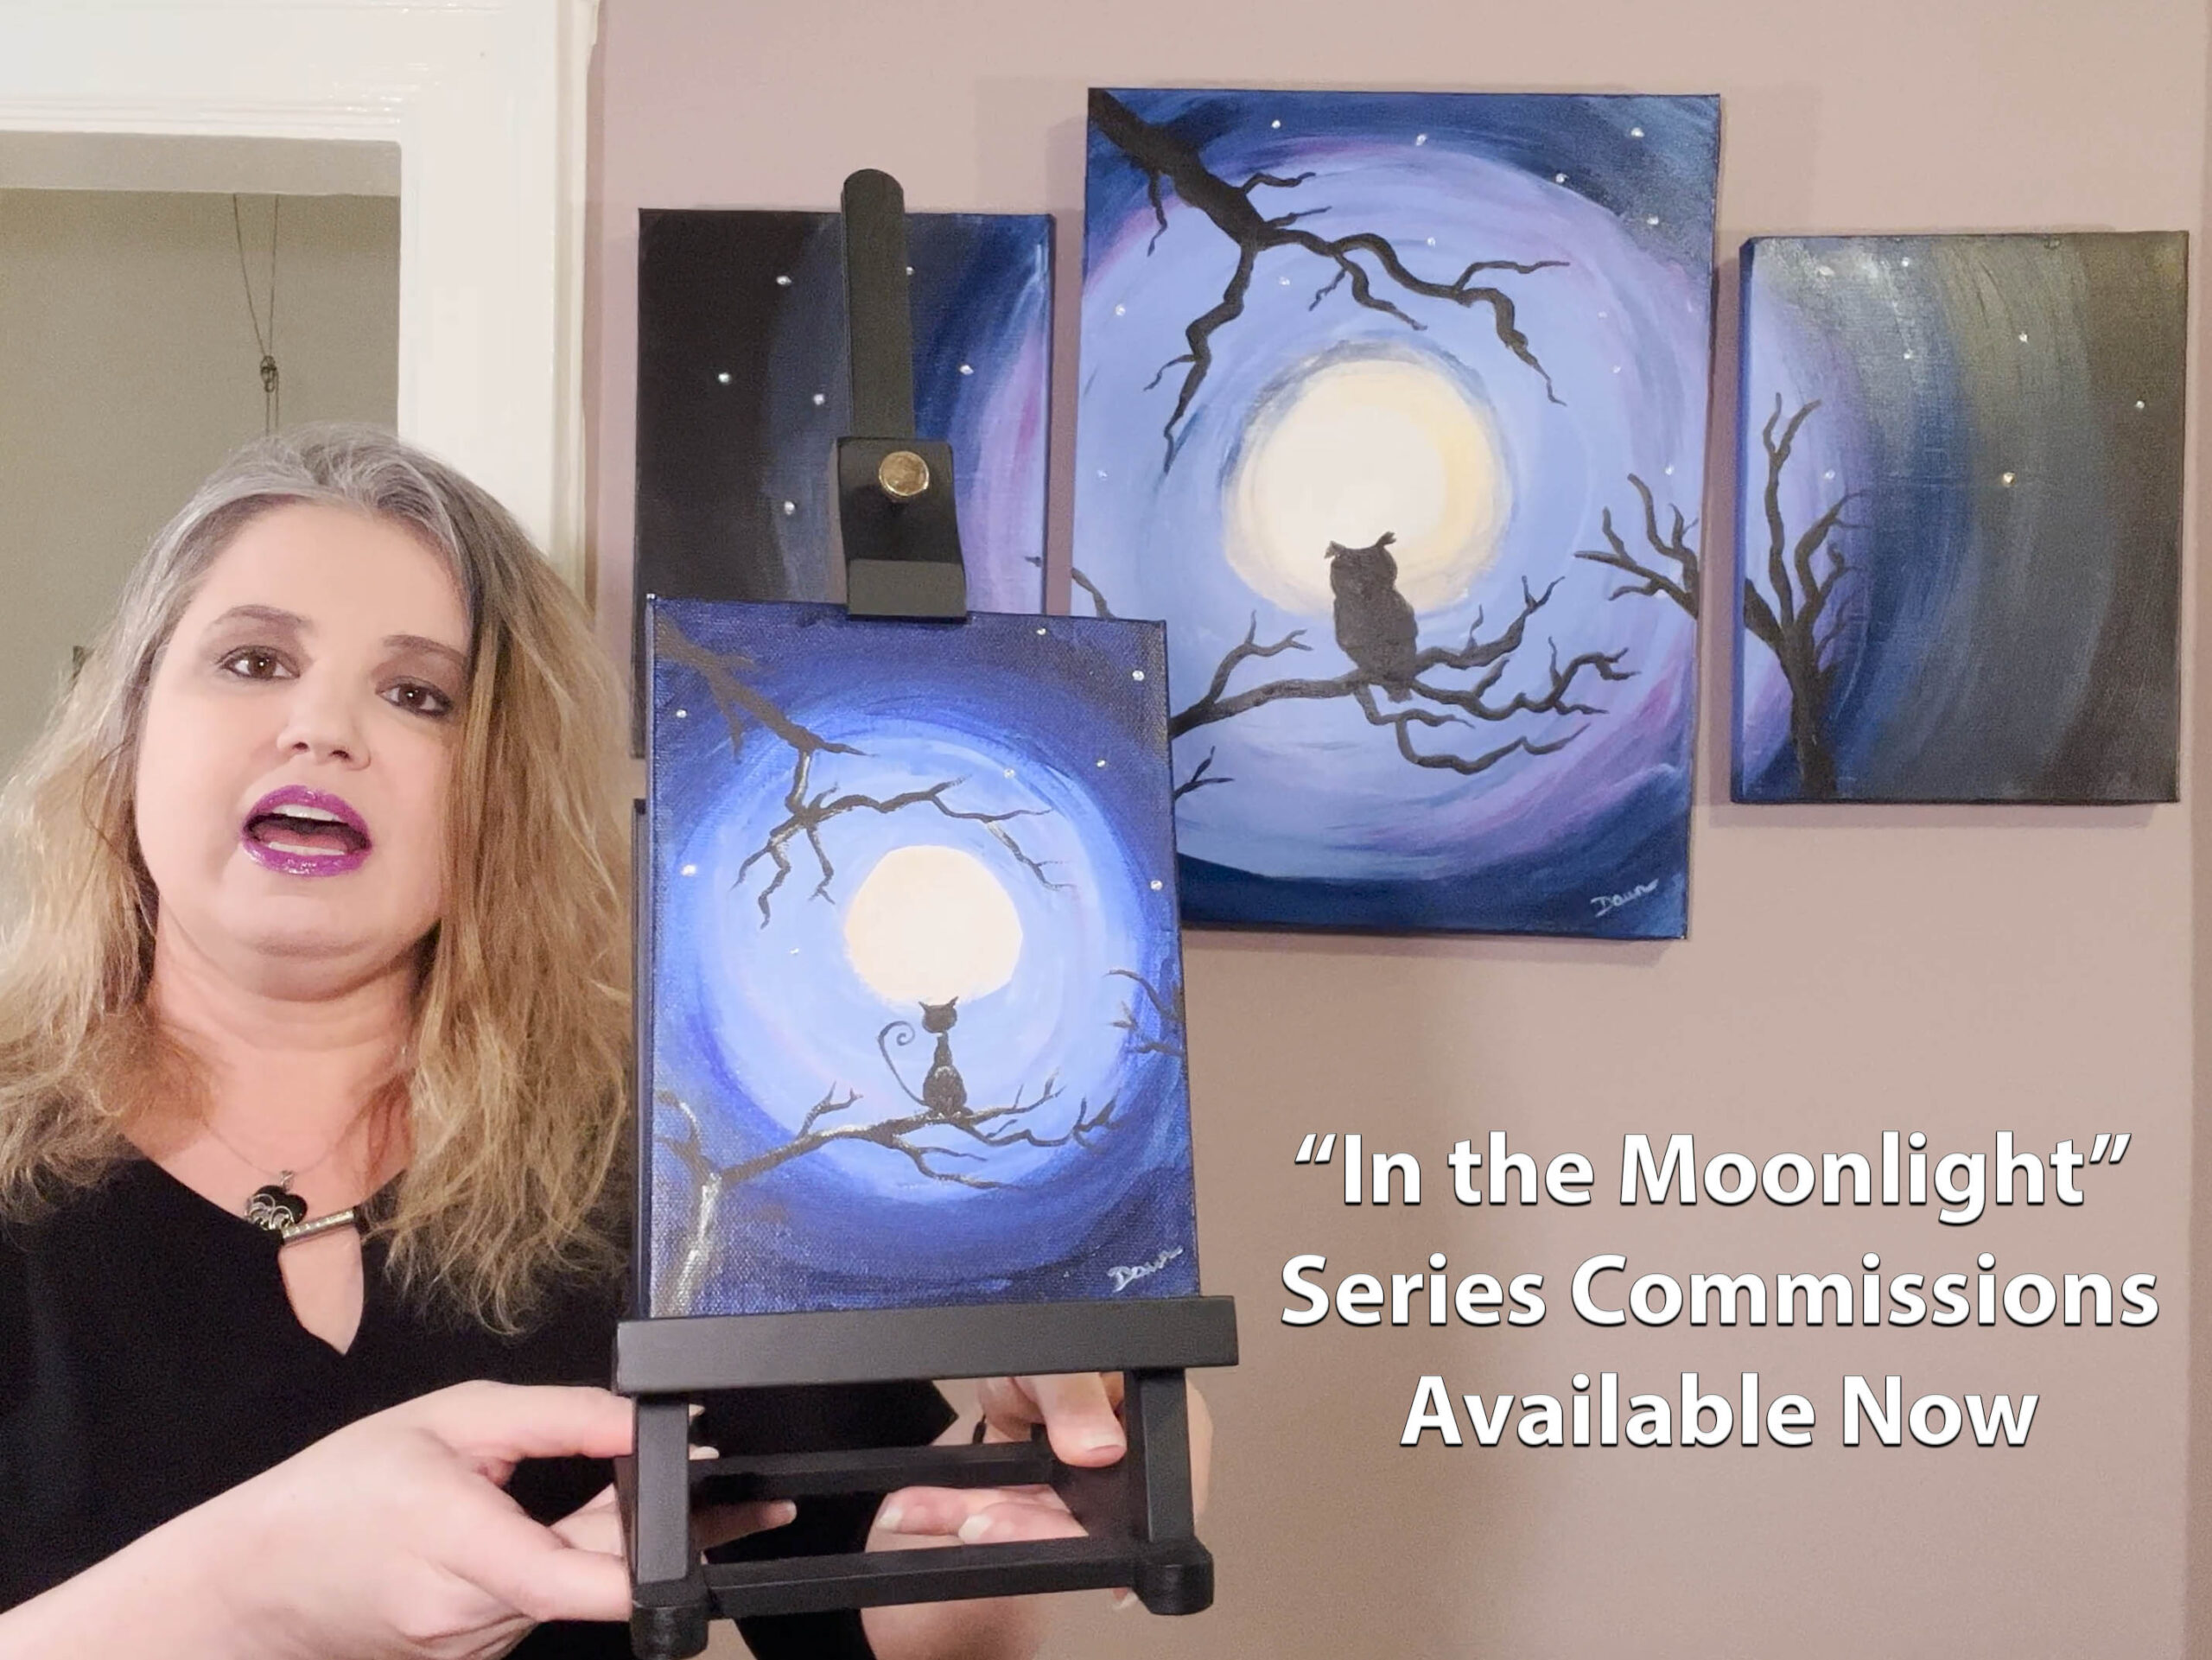 Commission Your In the Moonlight Series Artwork by Dawn M. Wayand